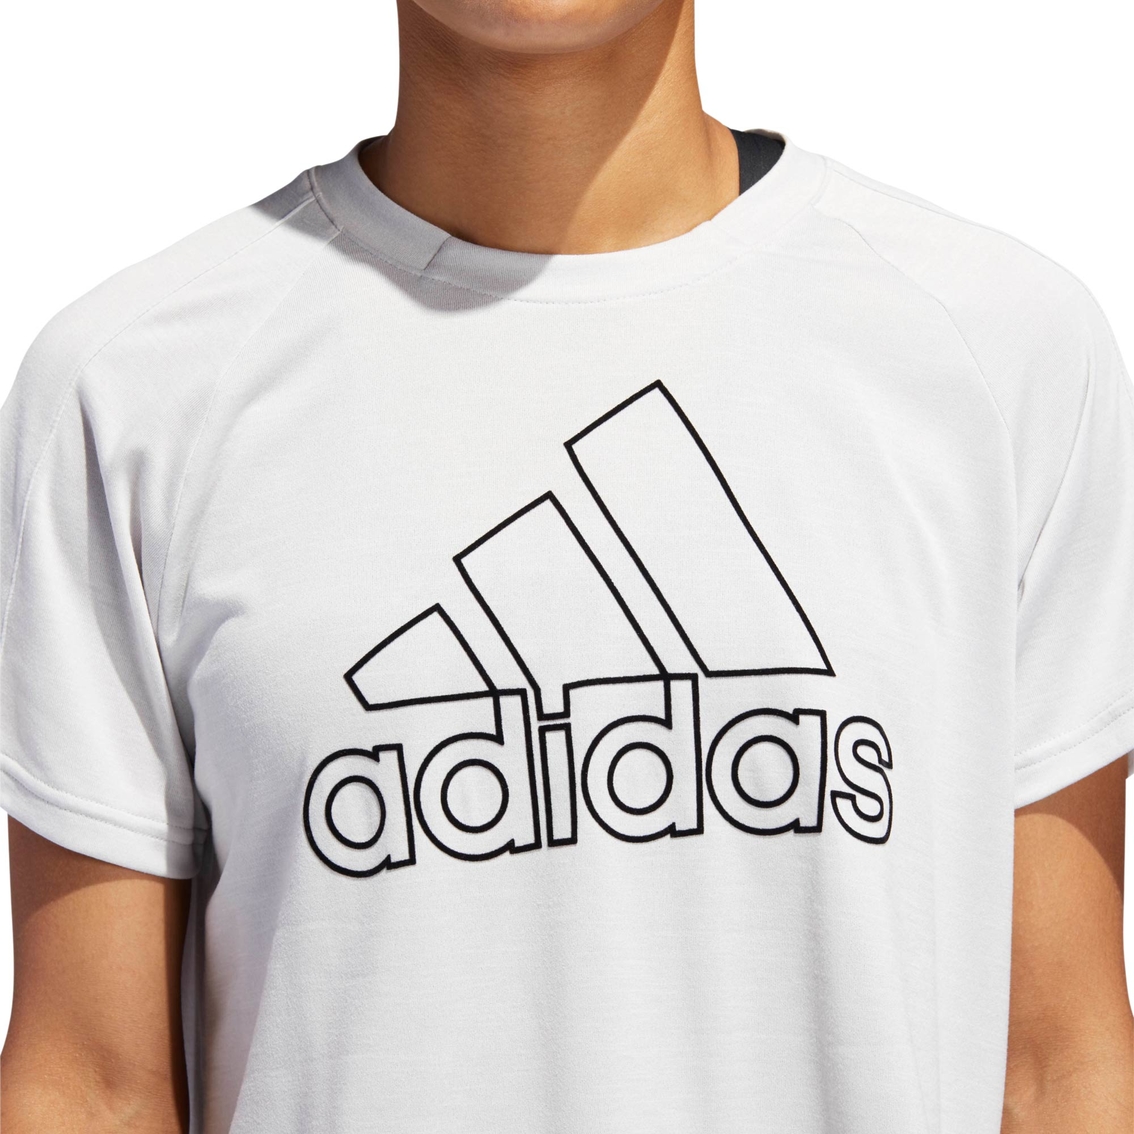 Adidas S2s Prize Tee | Tops | Clothing & Accessories | Shop The Exchange